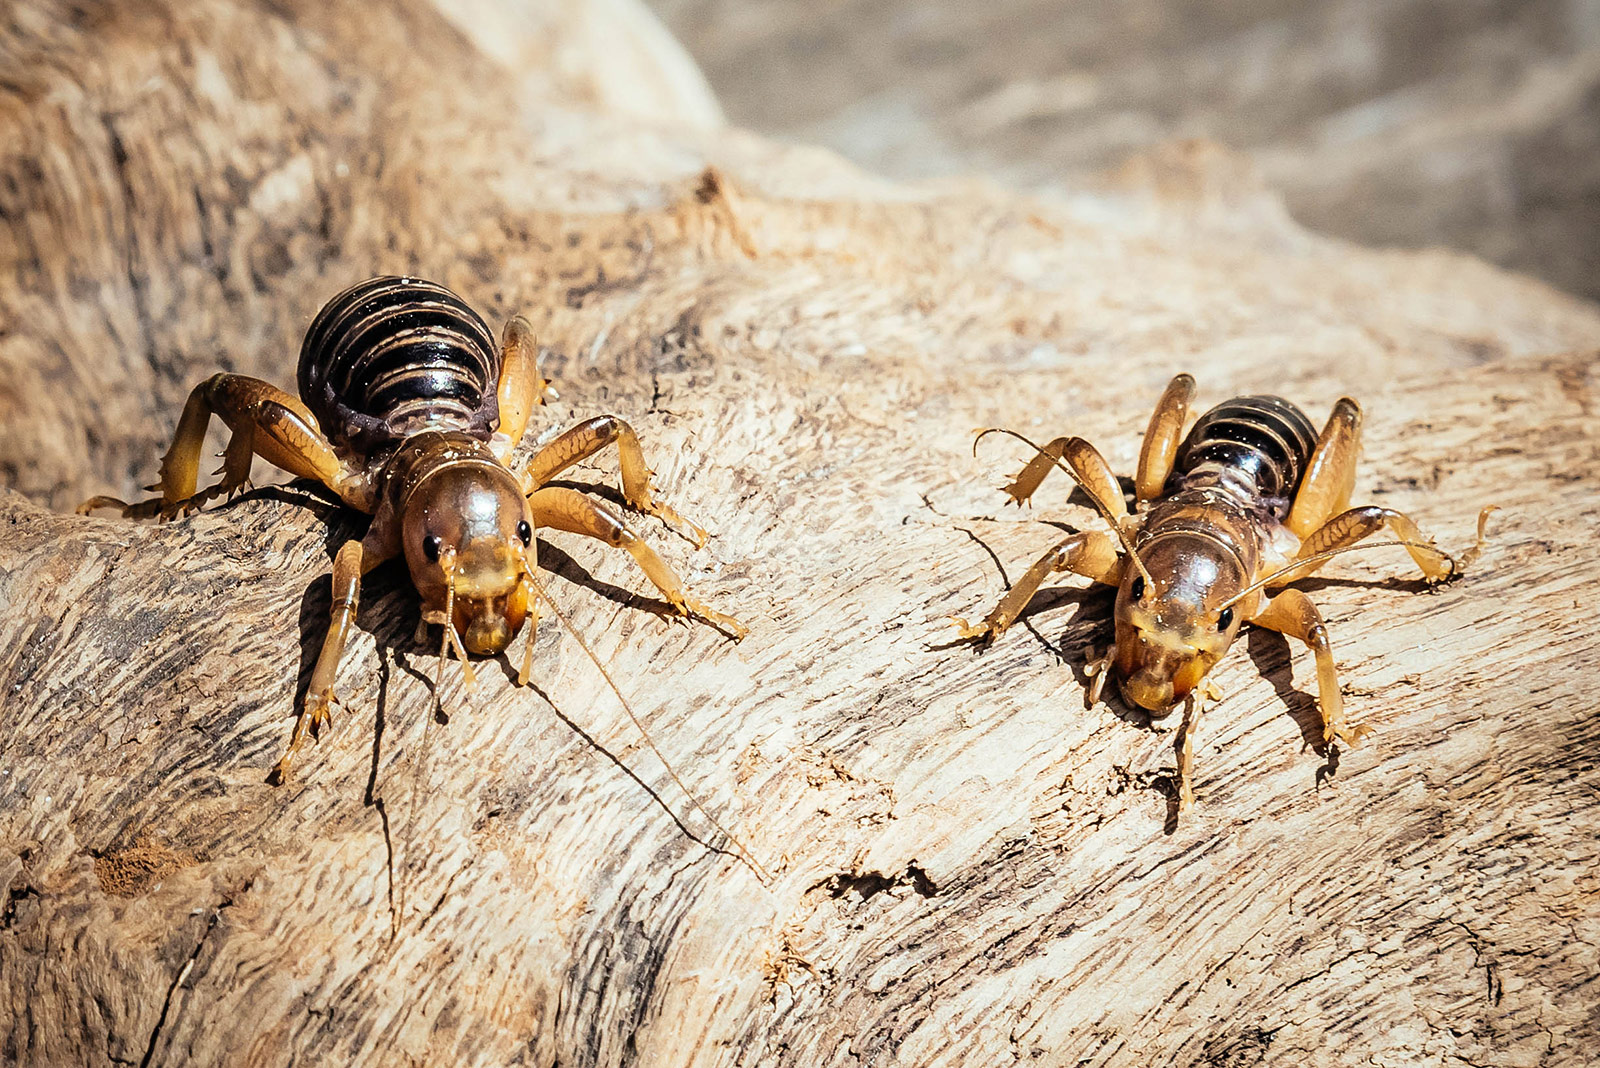 Two Jerusalem crickets on a wooden log looking at the camera